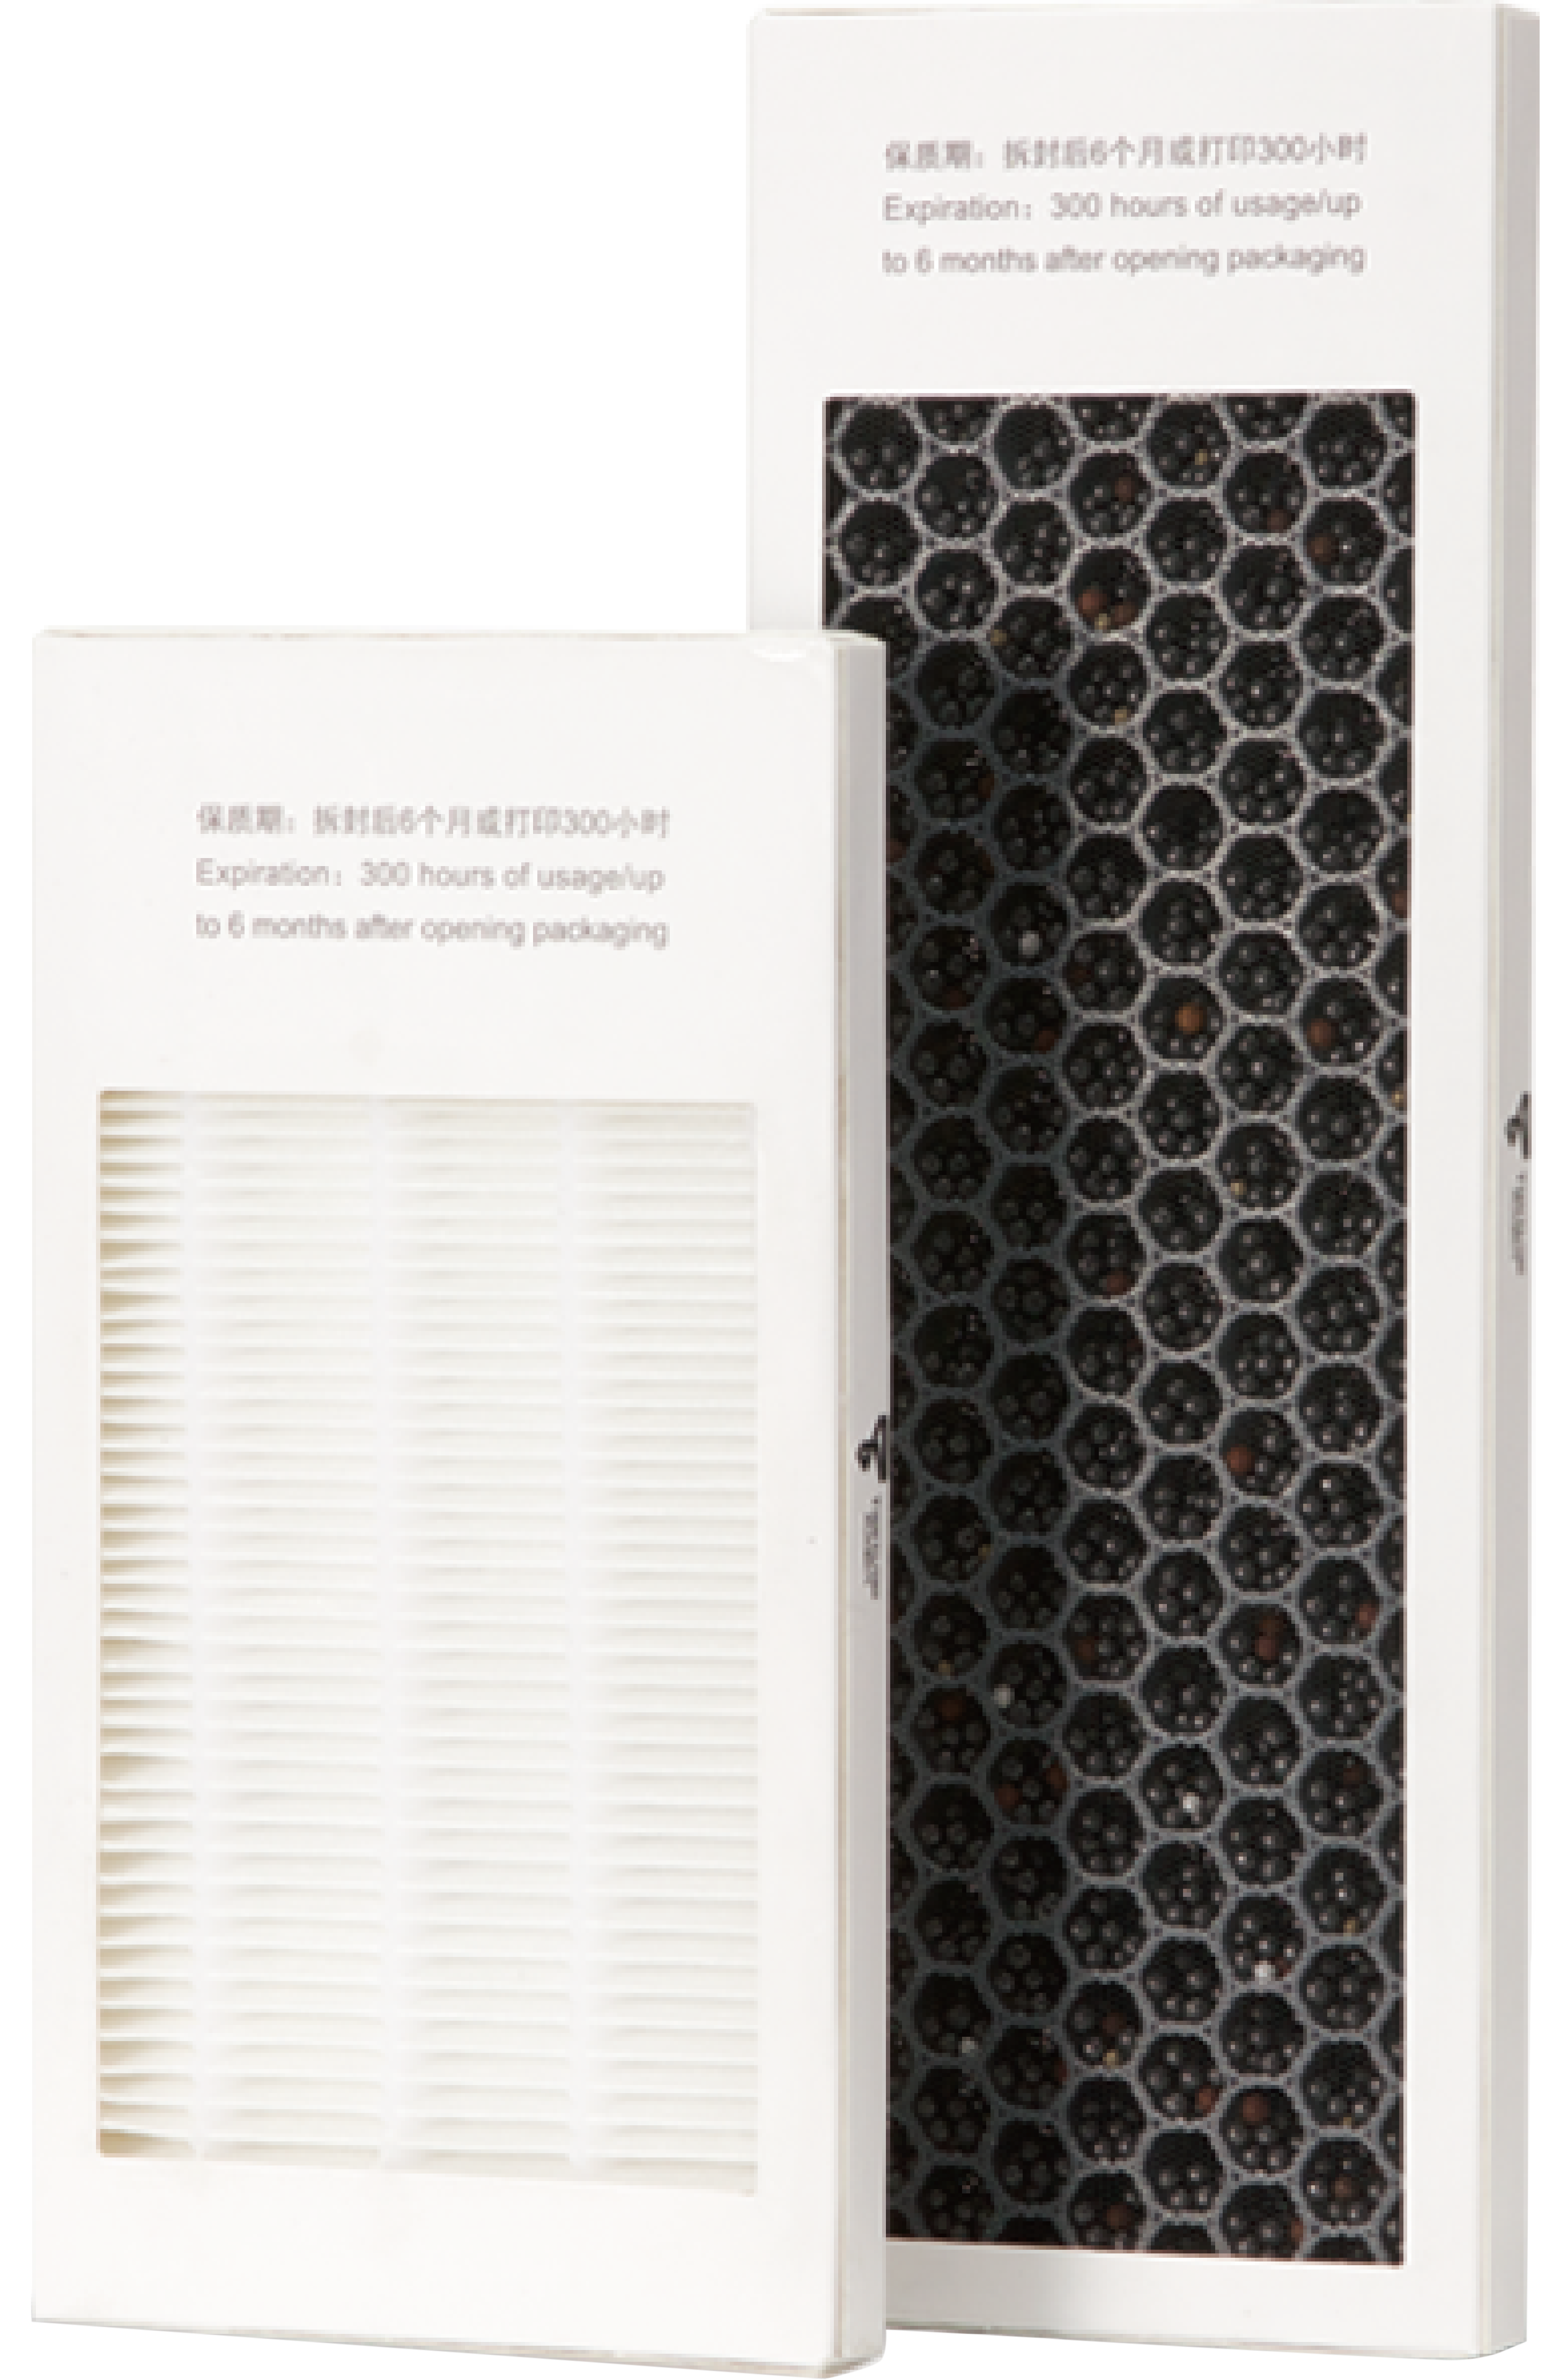 HEPA and Active Carbon Filters